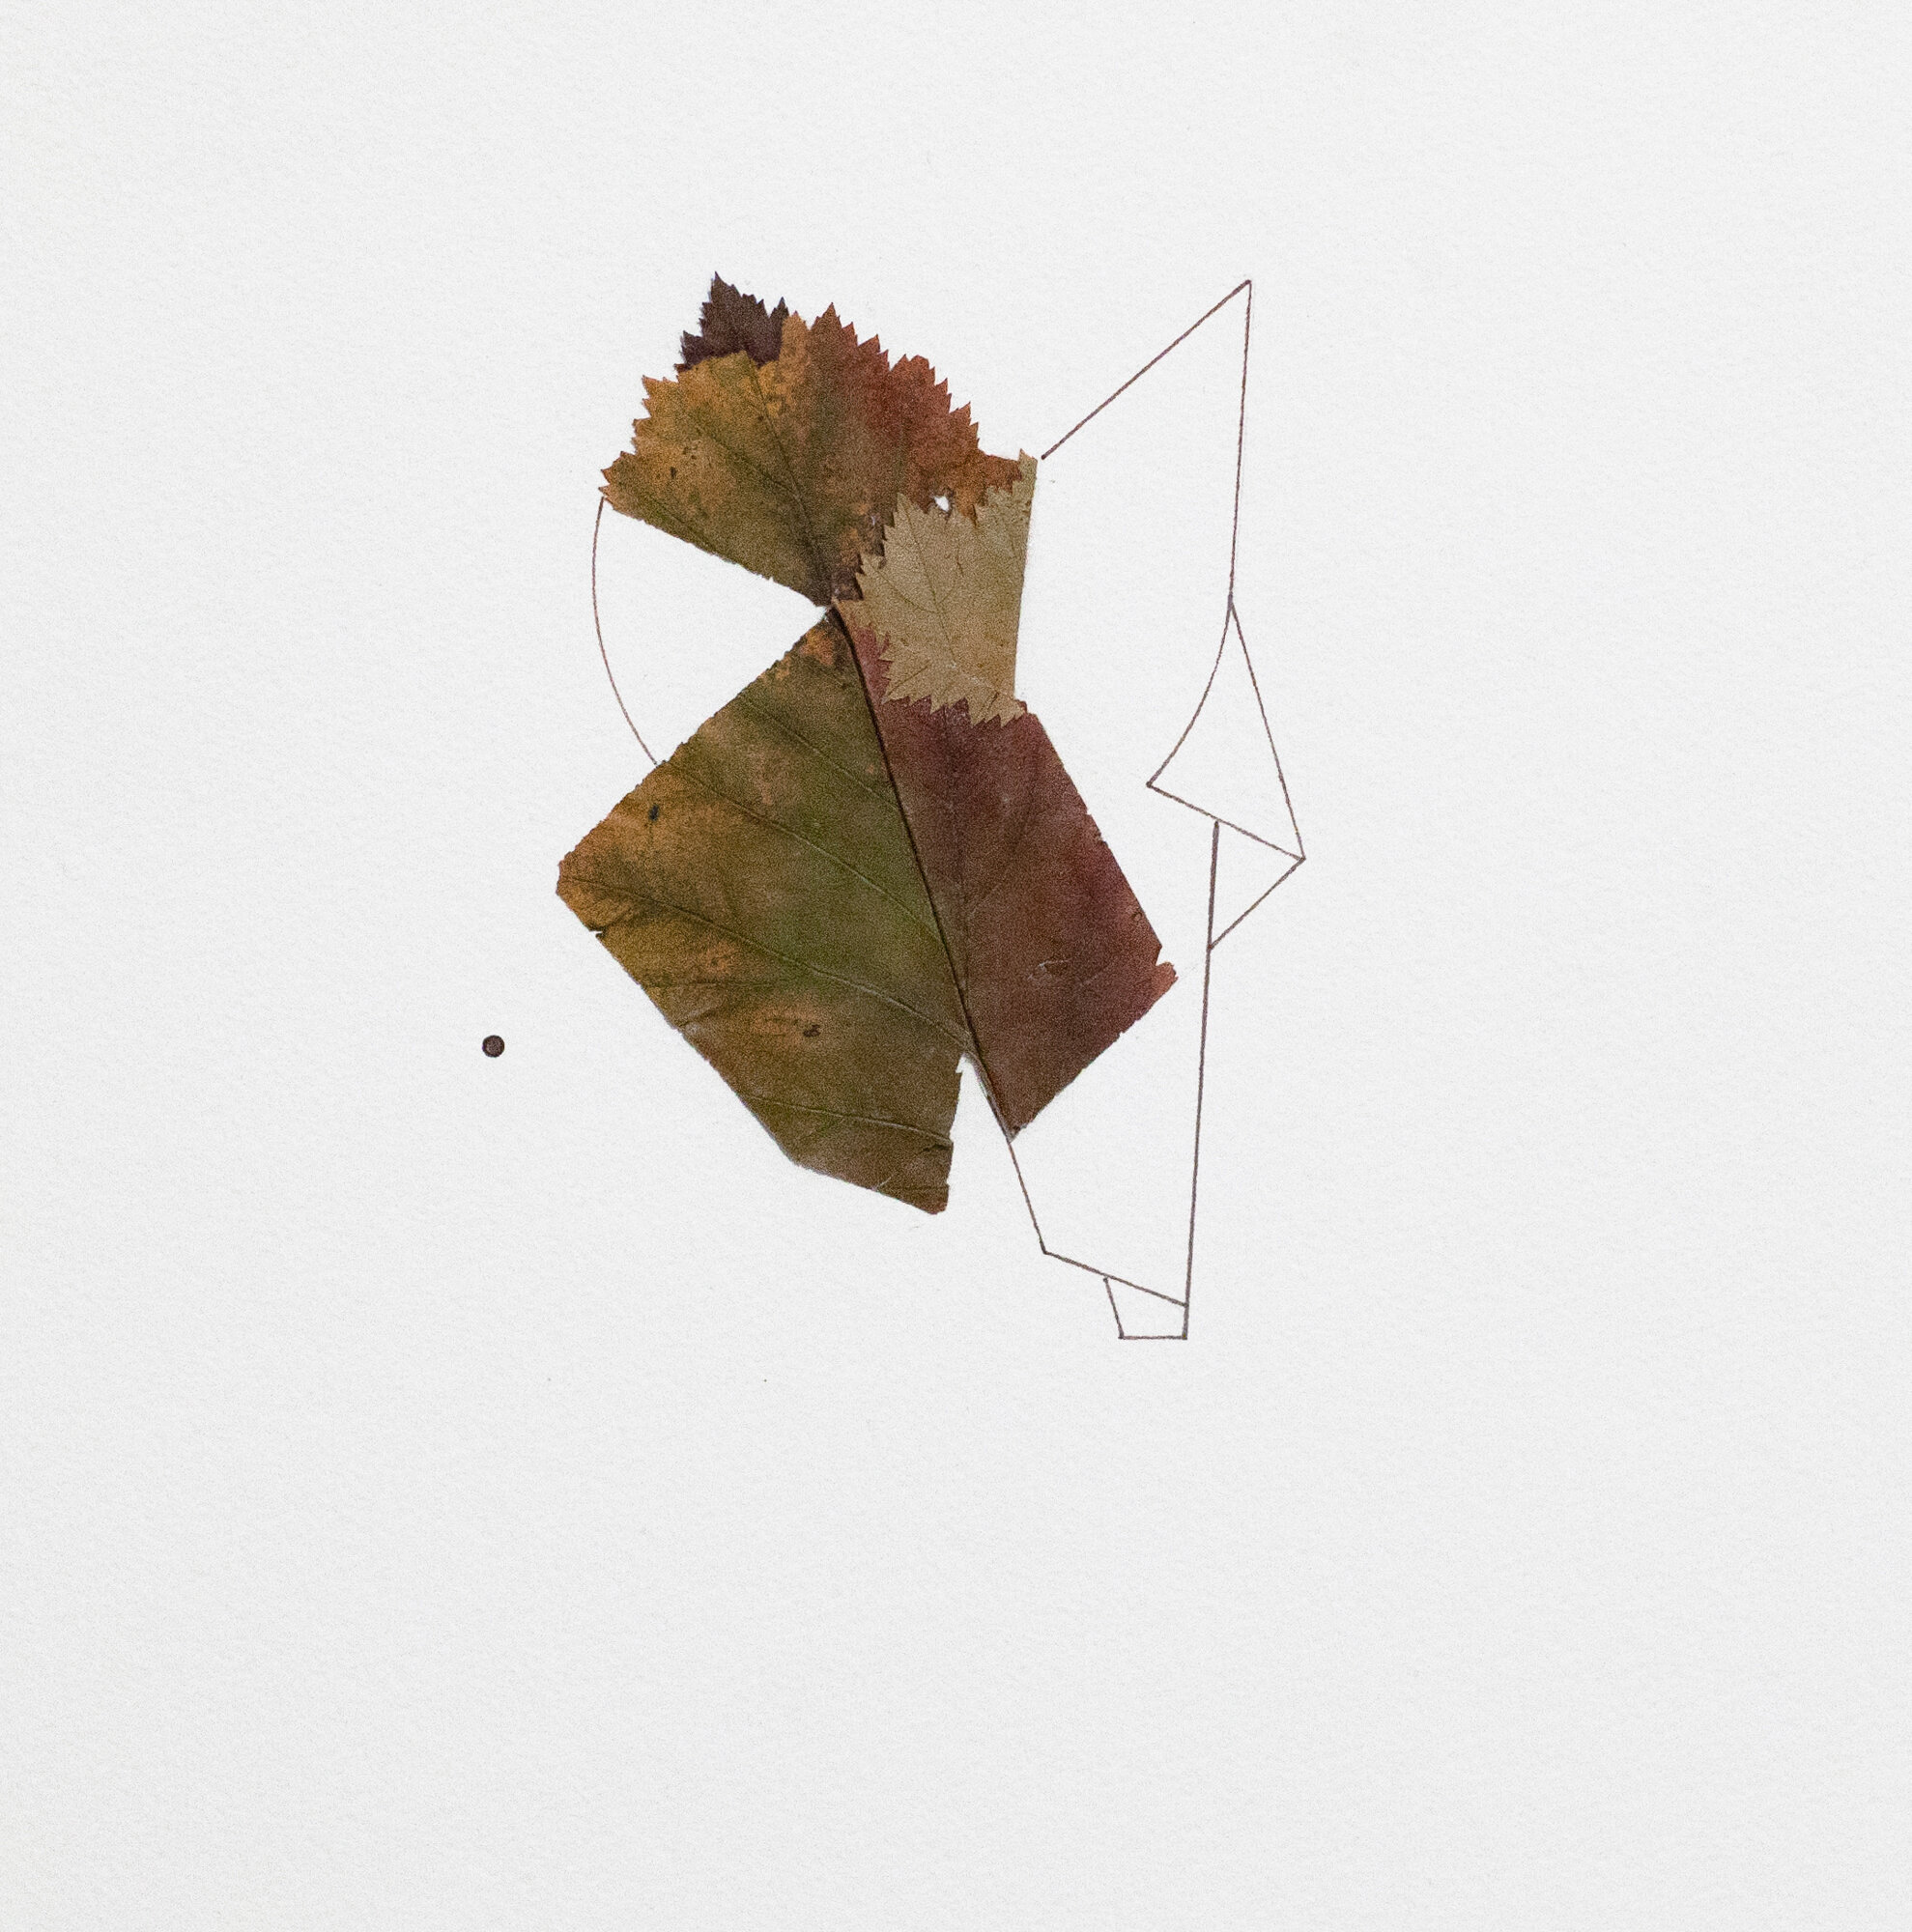   UNTITLED   48x36cm | collage, dried leaves and marker on paper    2015 